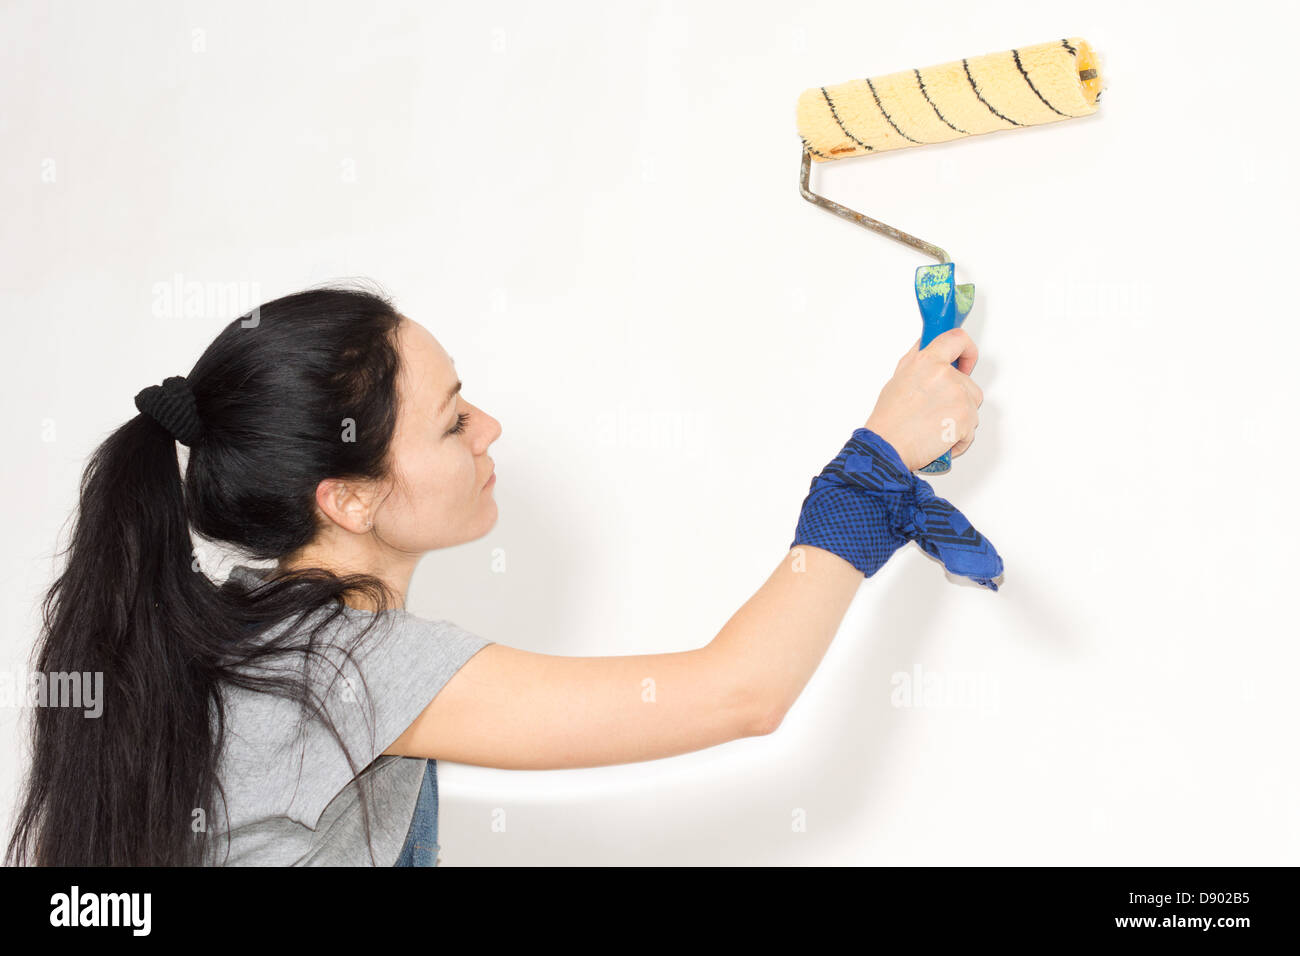 Woman painting a wall with a roller as she renovates or redecorates her home Stock Photo